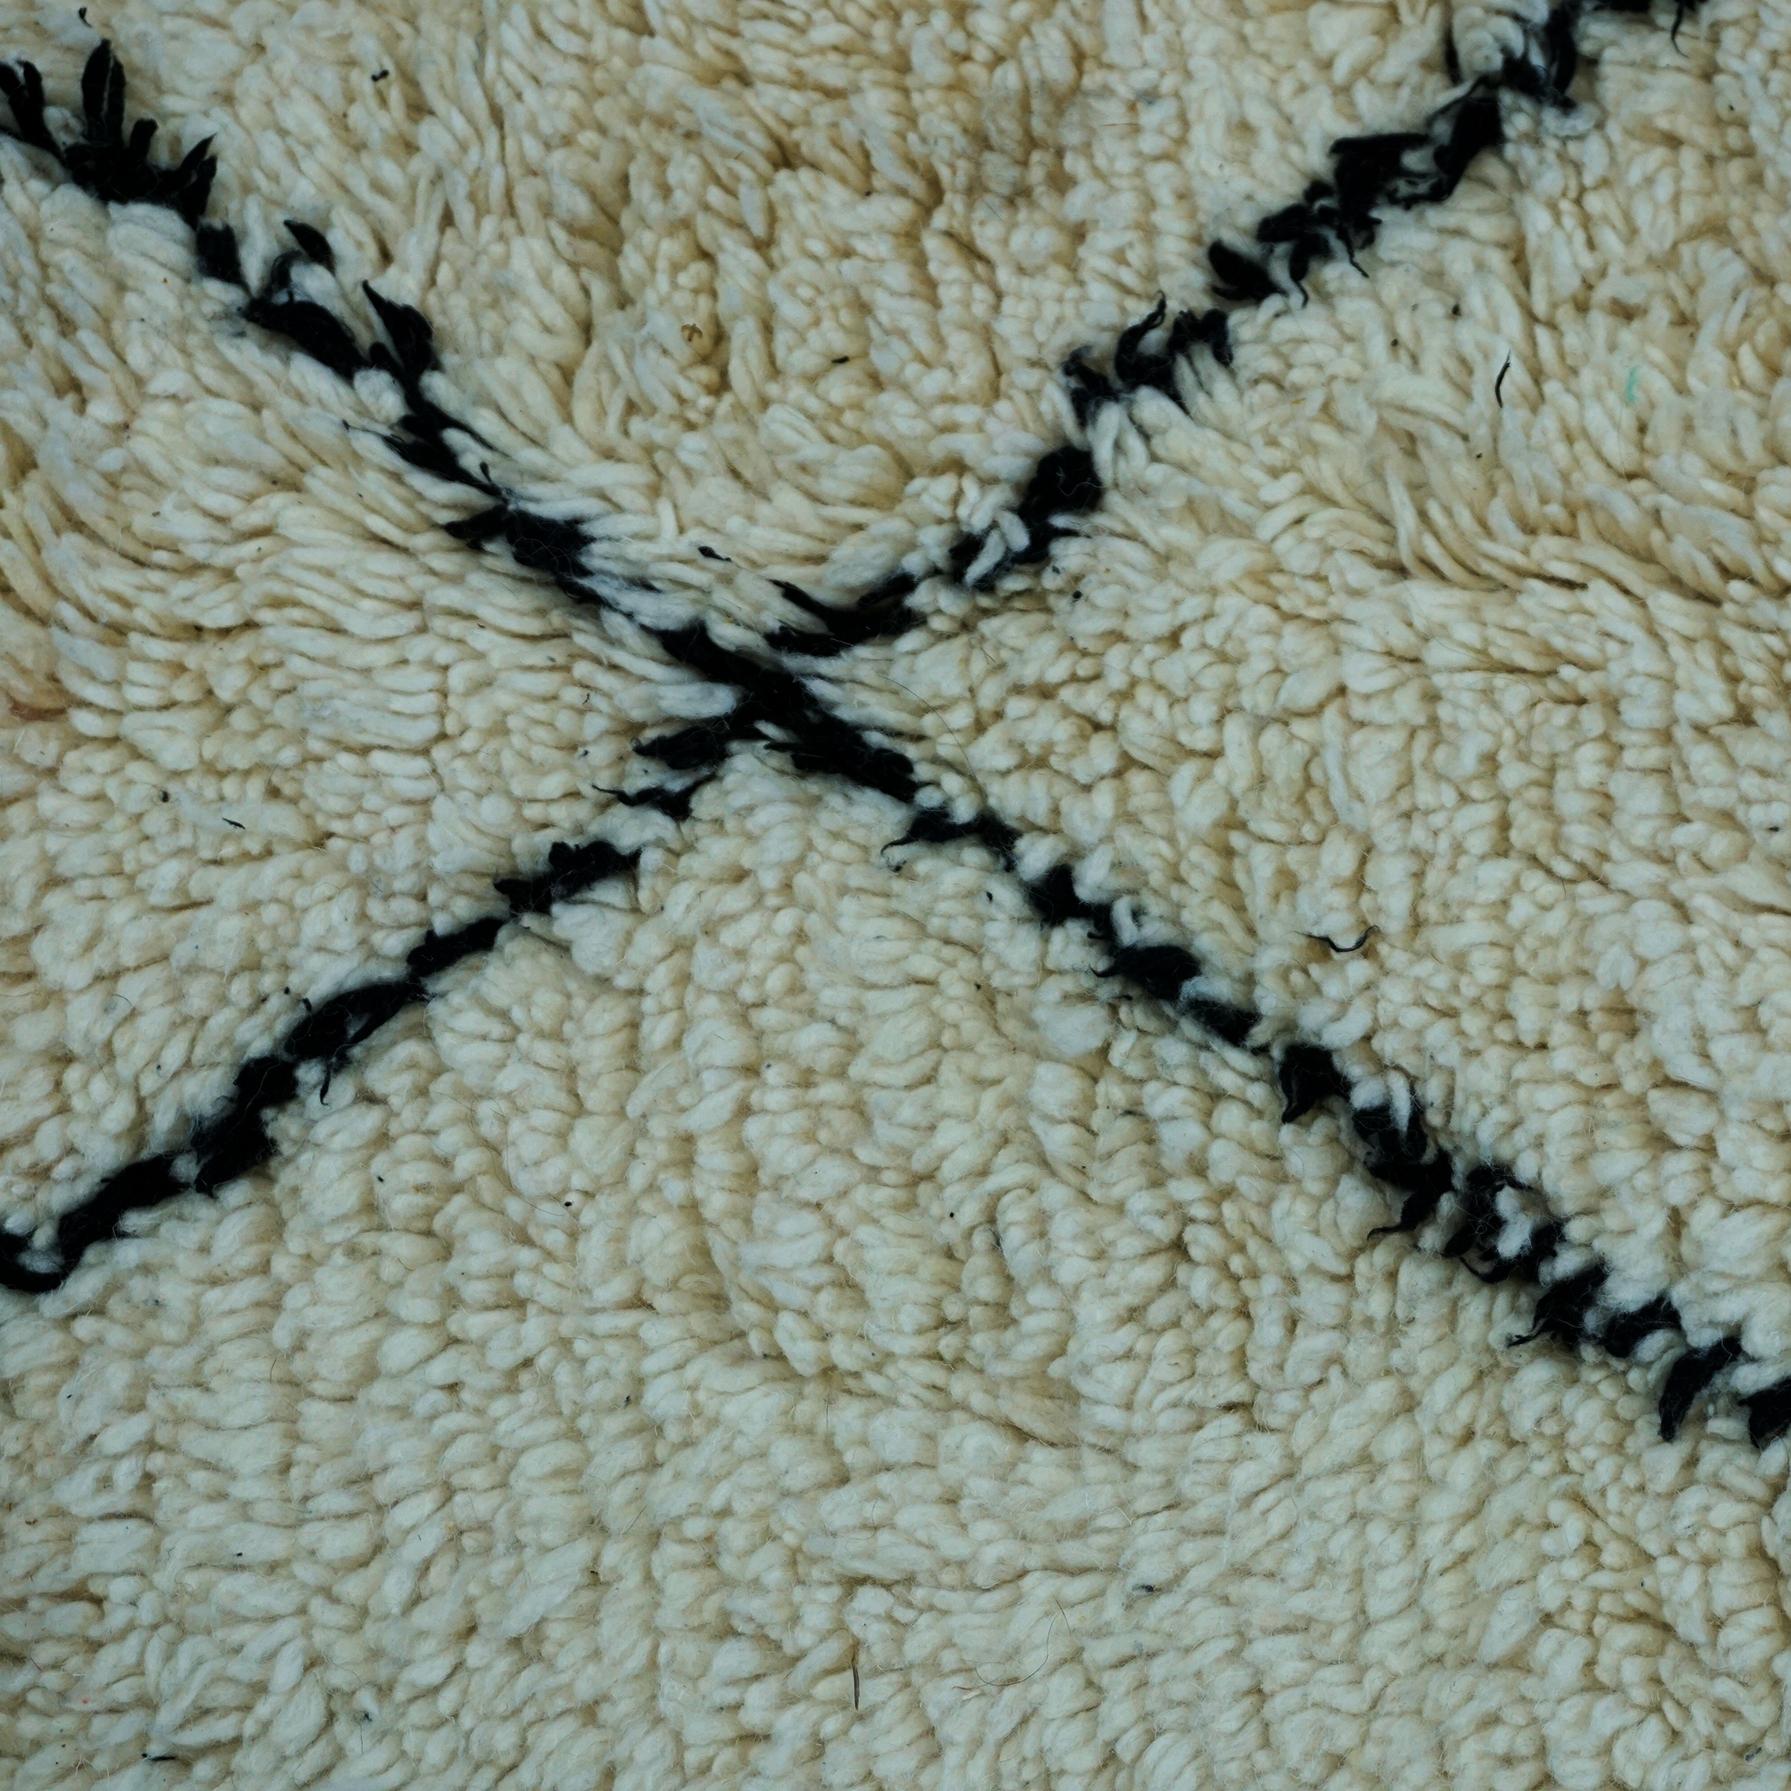 Tribal  Black and White Handwoven and Knotted Moroccan Beni Ourain Wool Rug